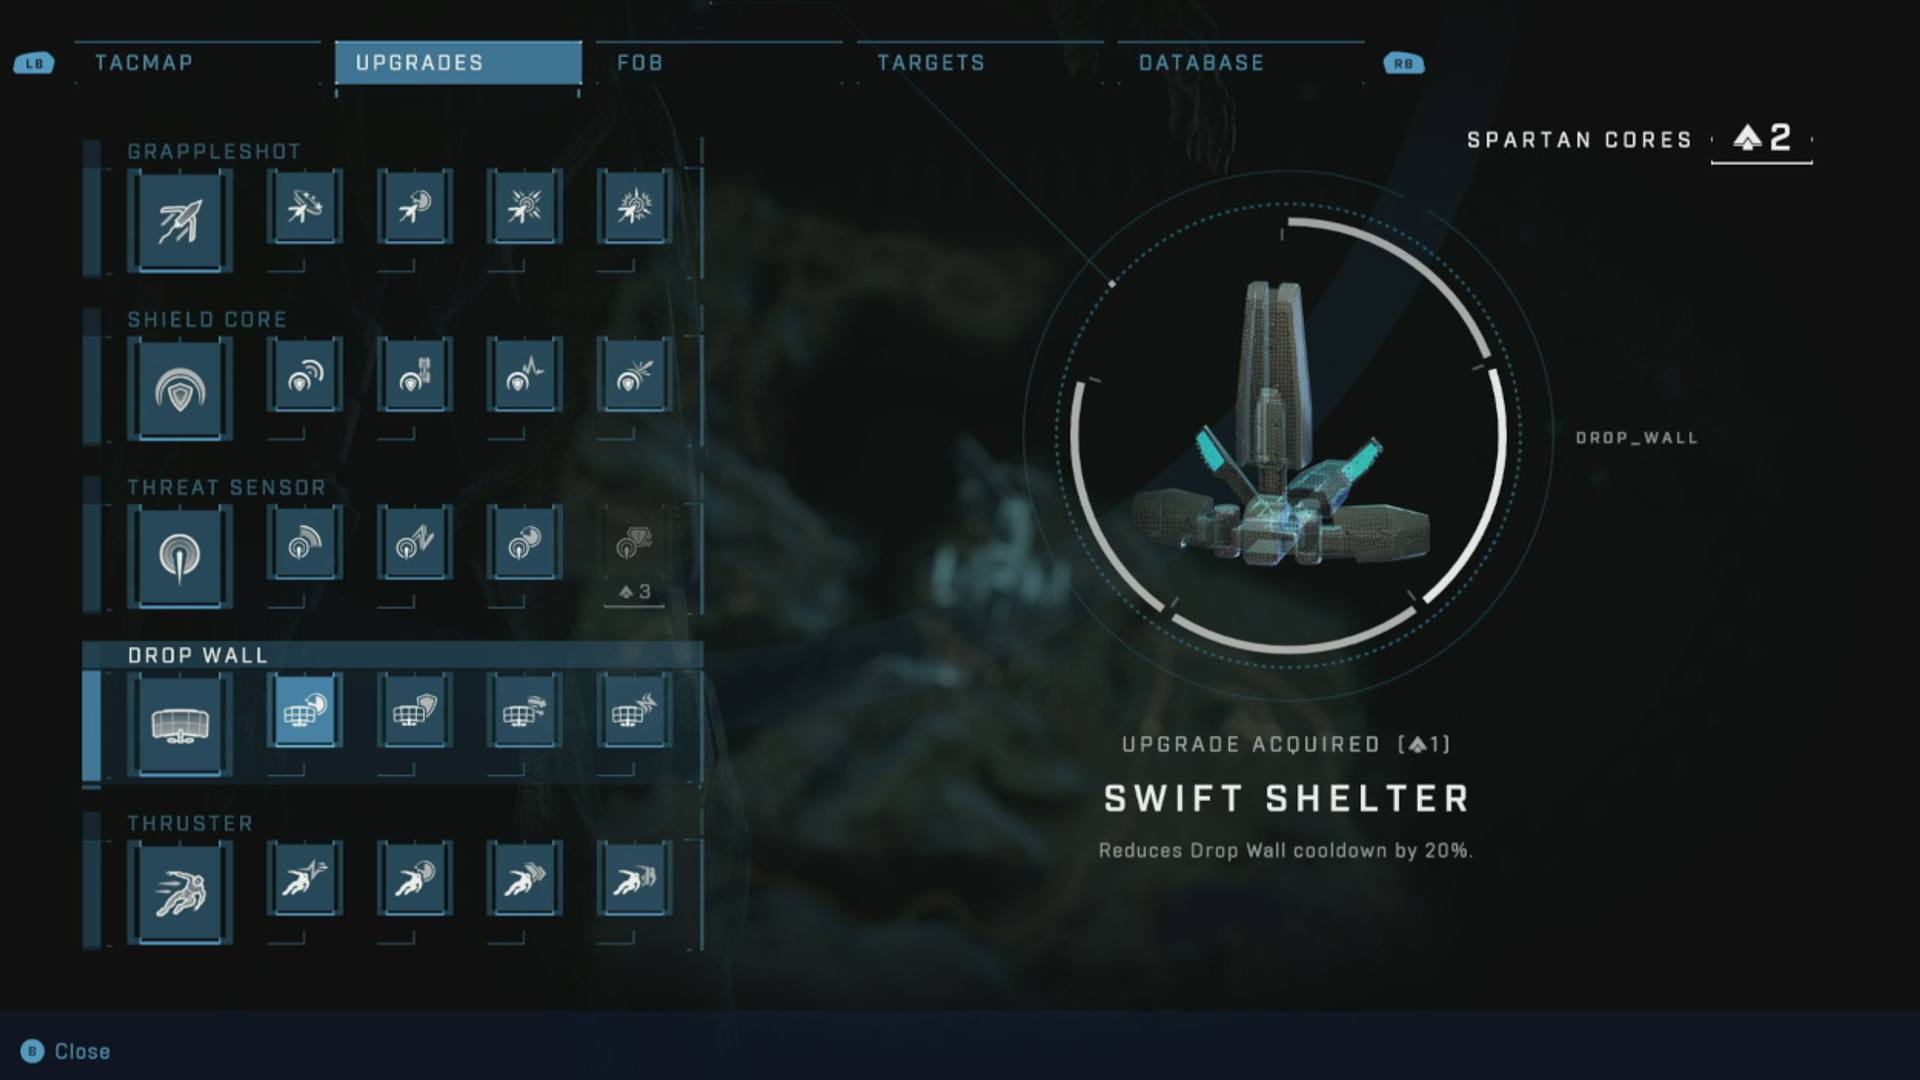 Halo Infinite Best Upgrades: The menu showing the Swift Shelter upgrade.